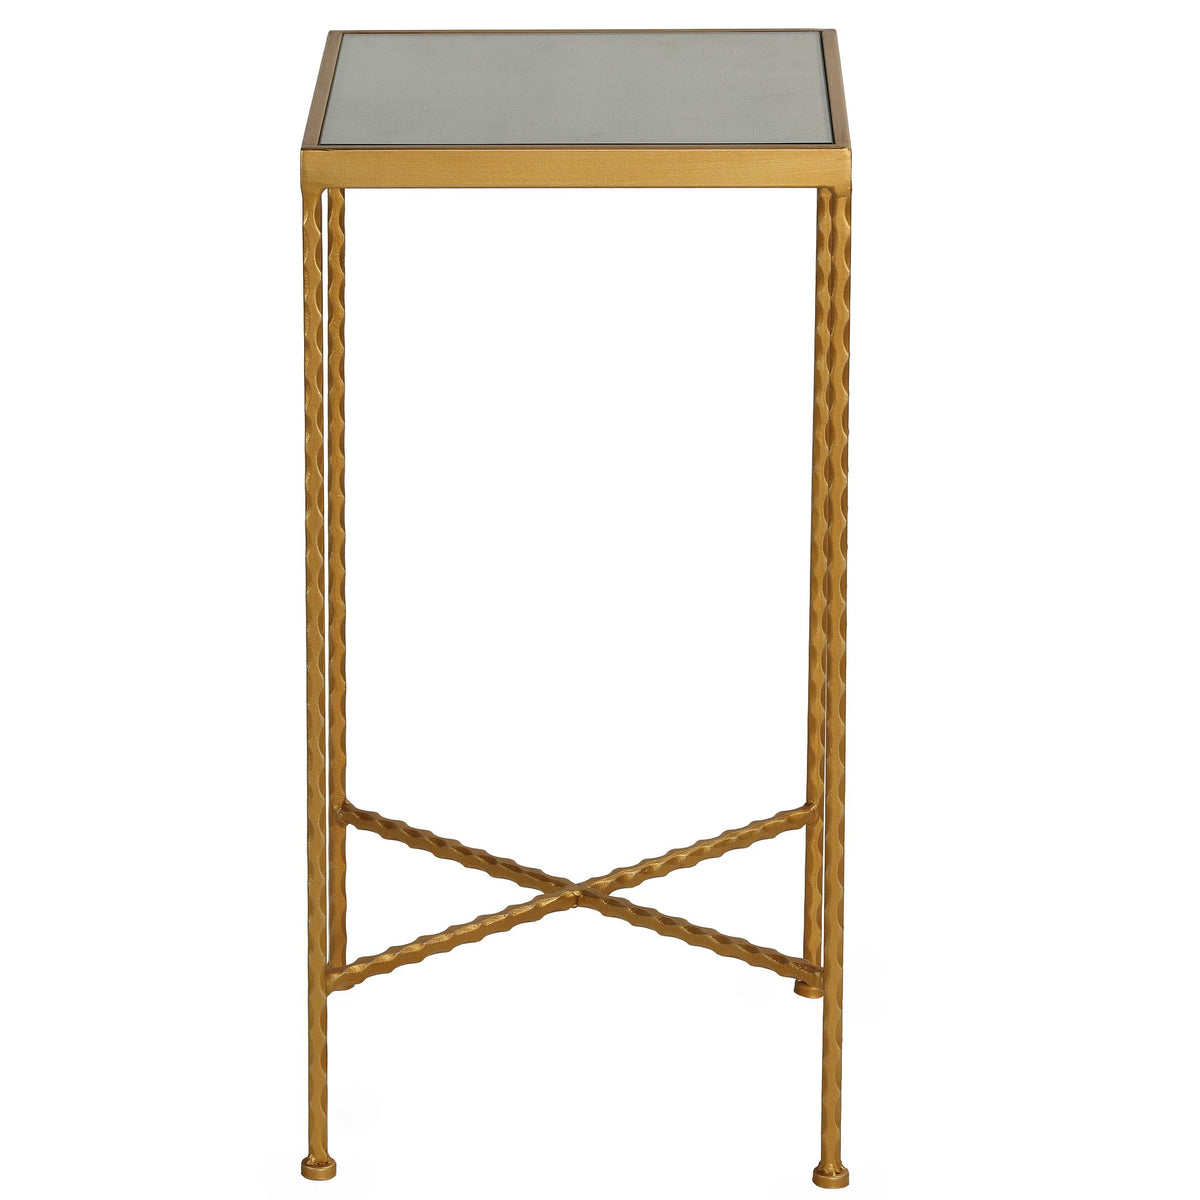 Cortesi Home Cleo Square Accent Table Painted Gold, Glass Snakeskin Top